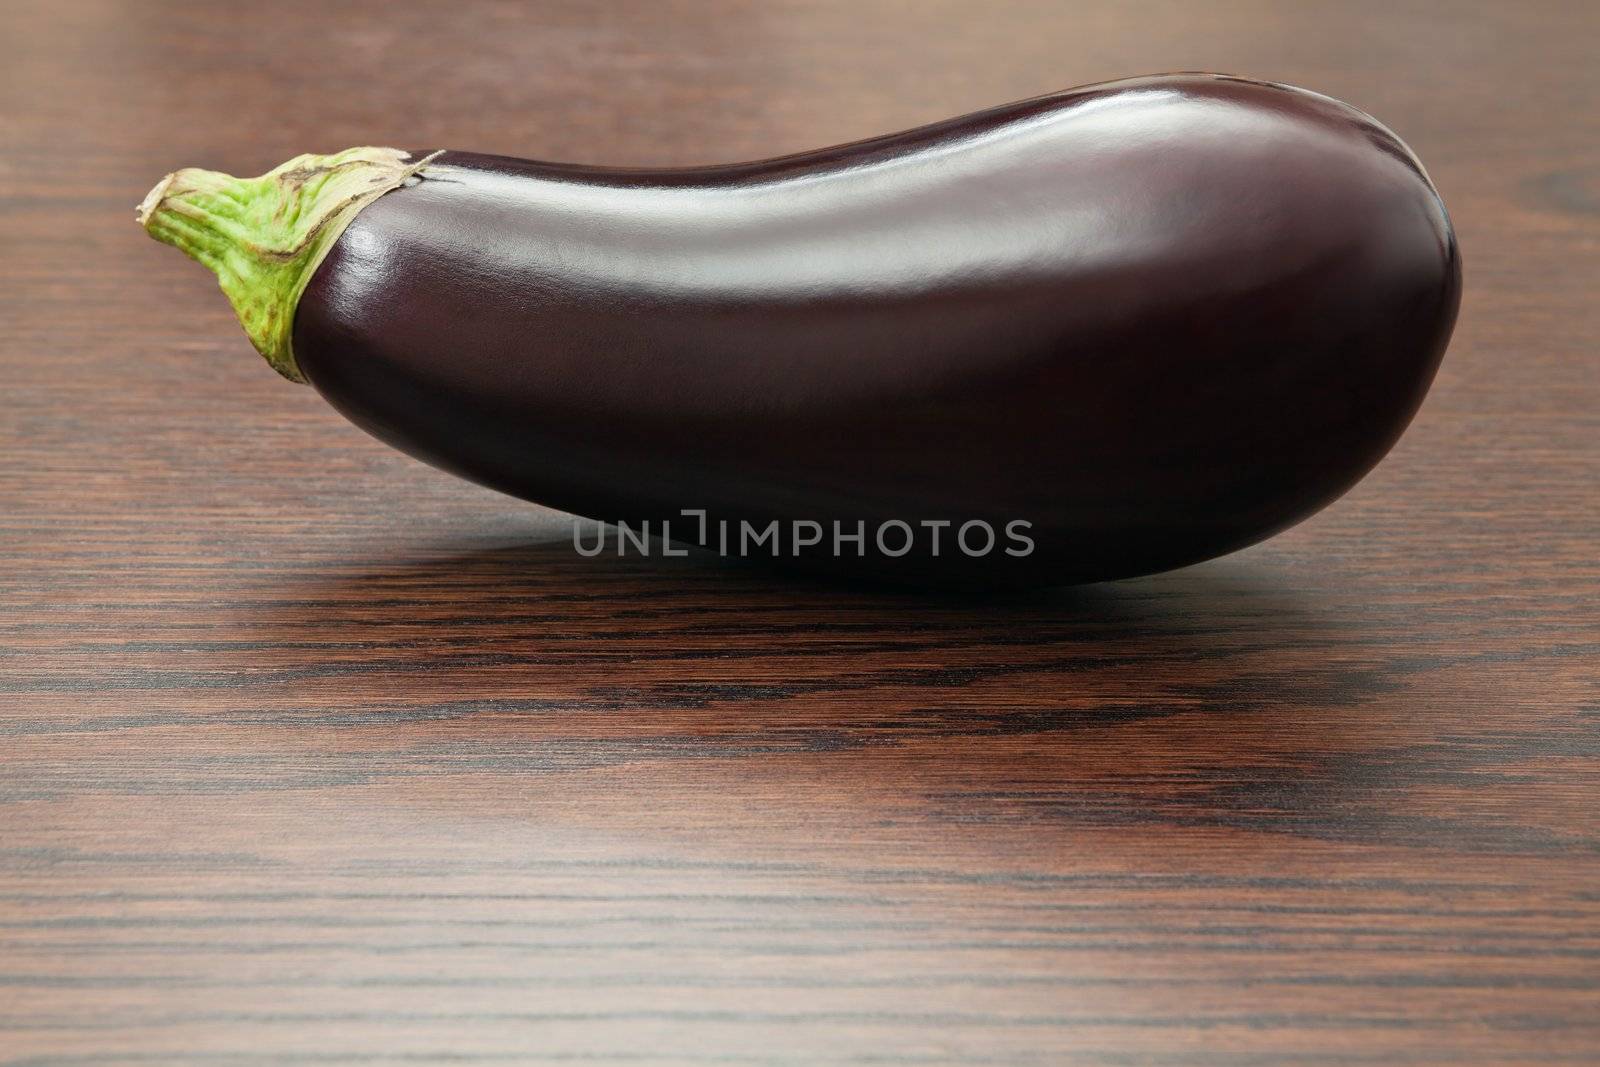 Photo of an eggplant resting on a wood table.